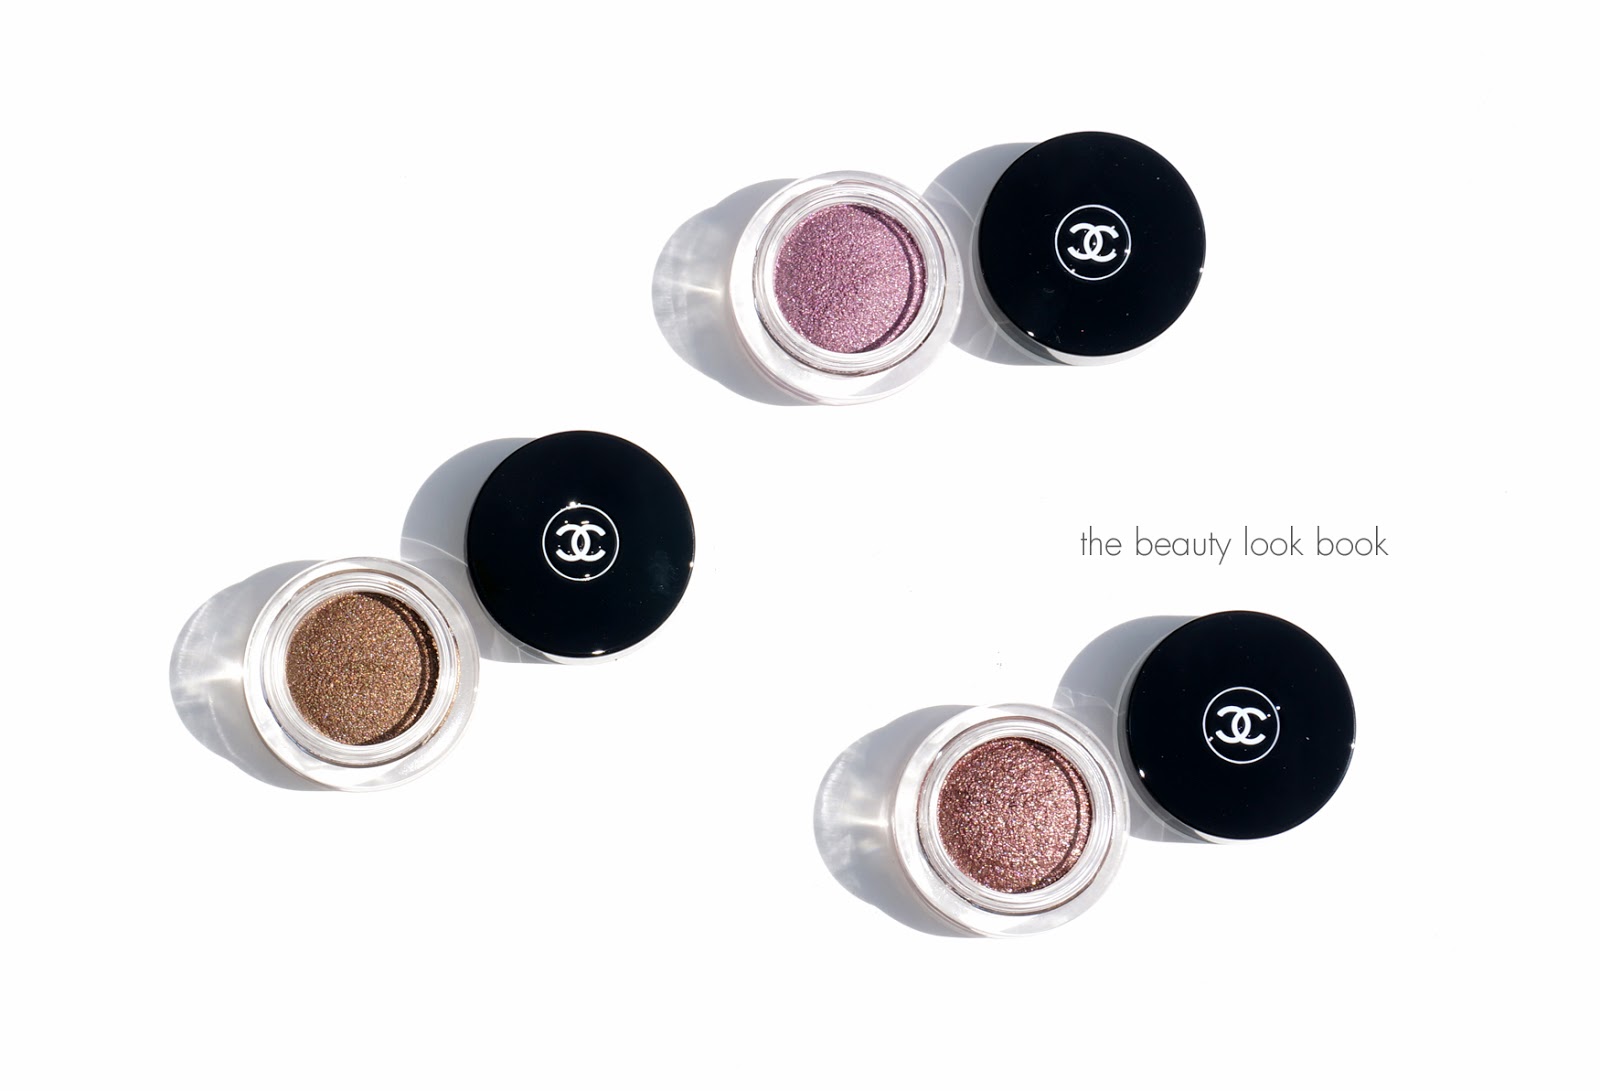 Chanel Illusion D'Ombre Mirage, New Moon and Utopia - The Beauty